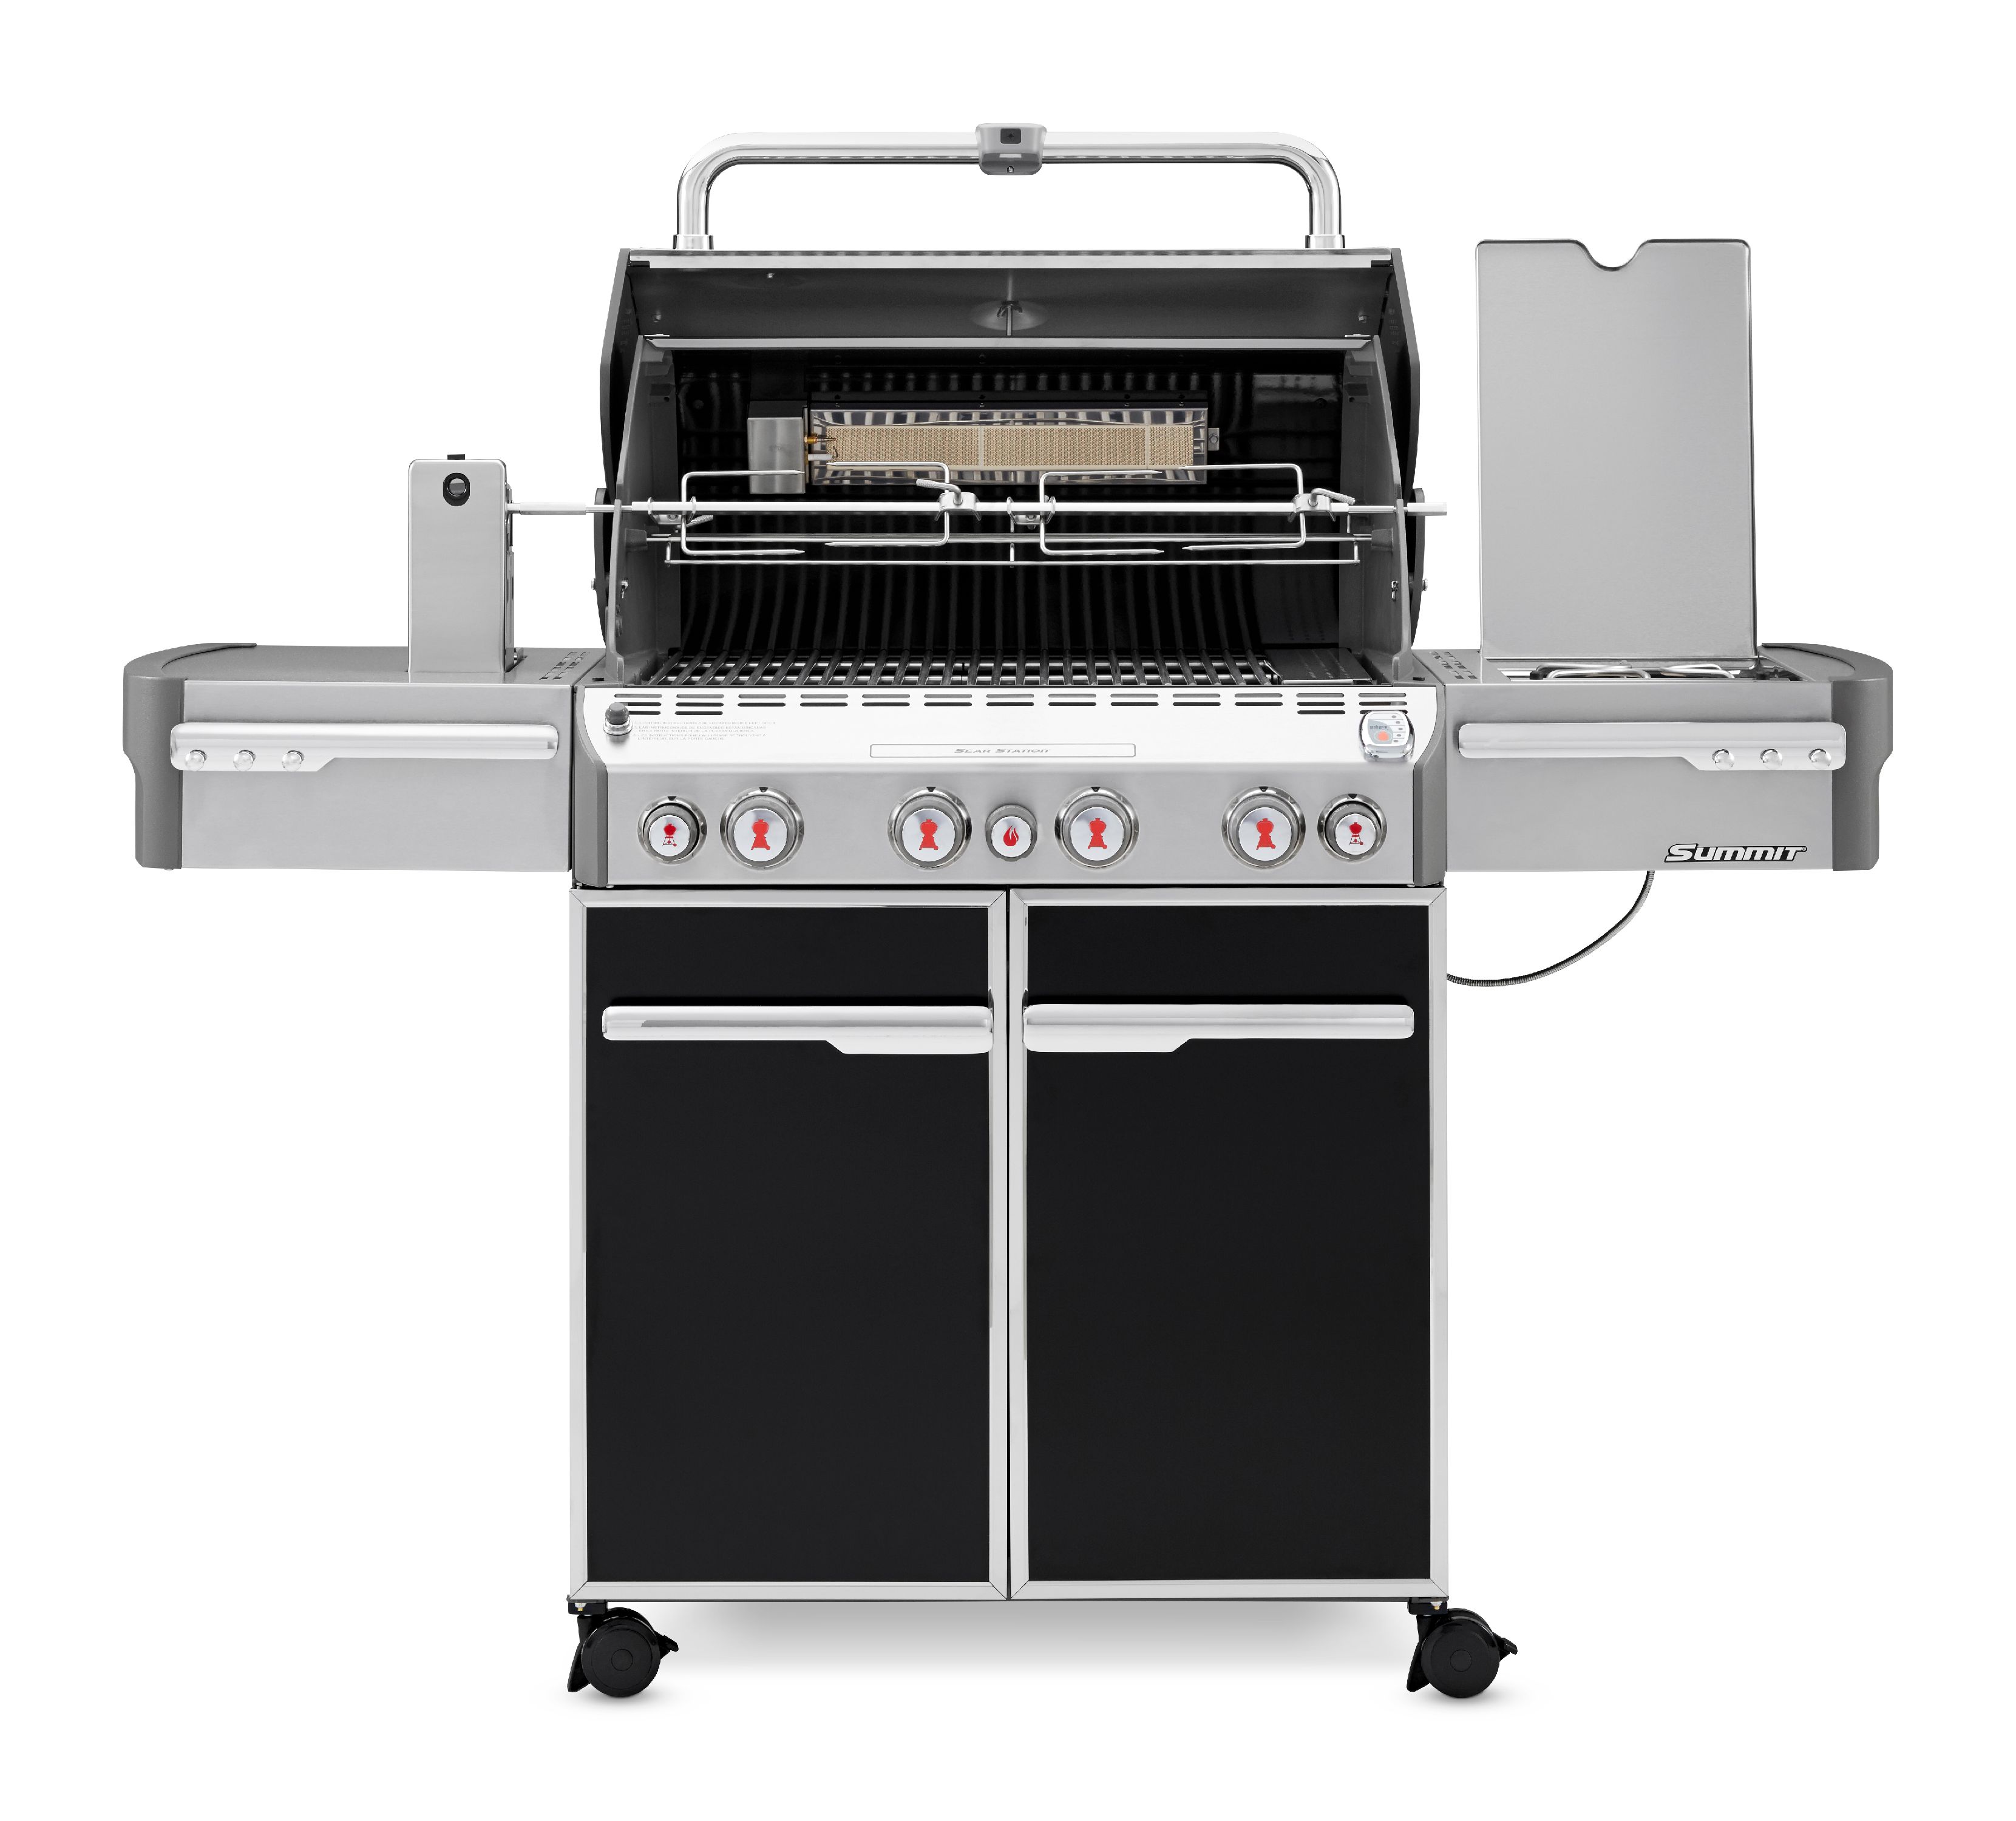 Weber Summit E-470 4-Burner Propane Gas Grill in Black with Built-In Thermometer and Rotisserie - image 1 of 23